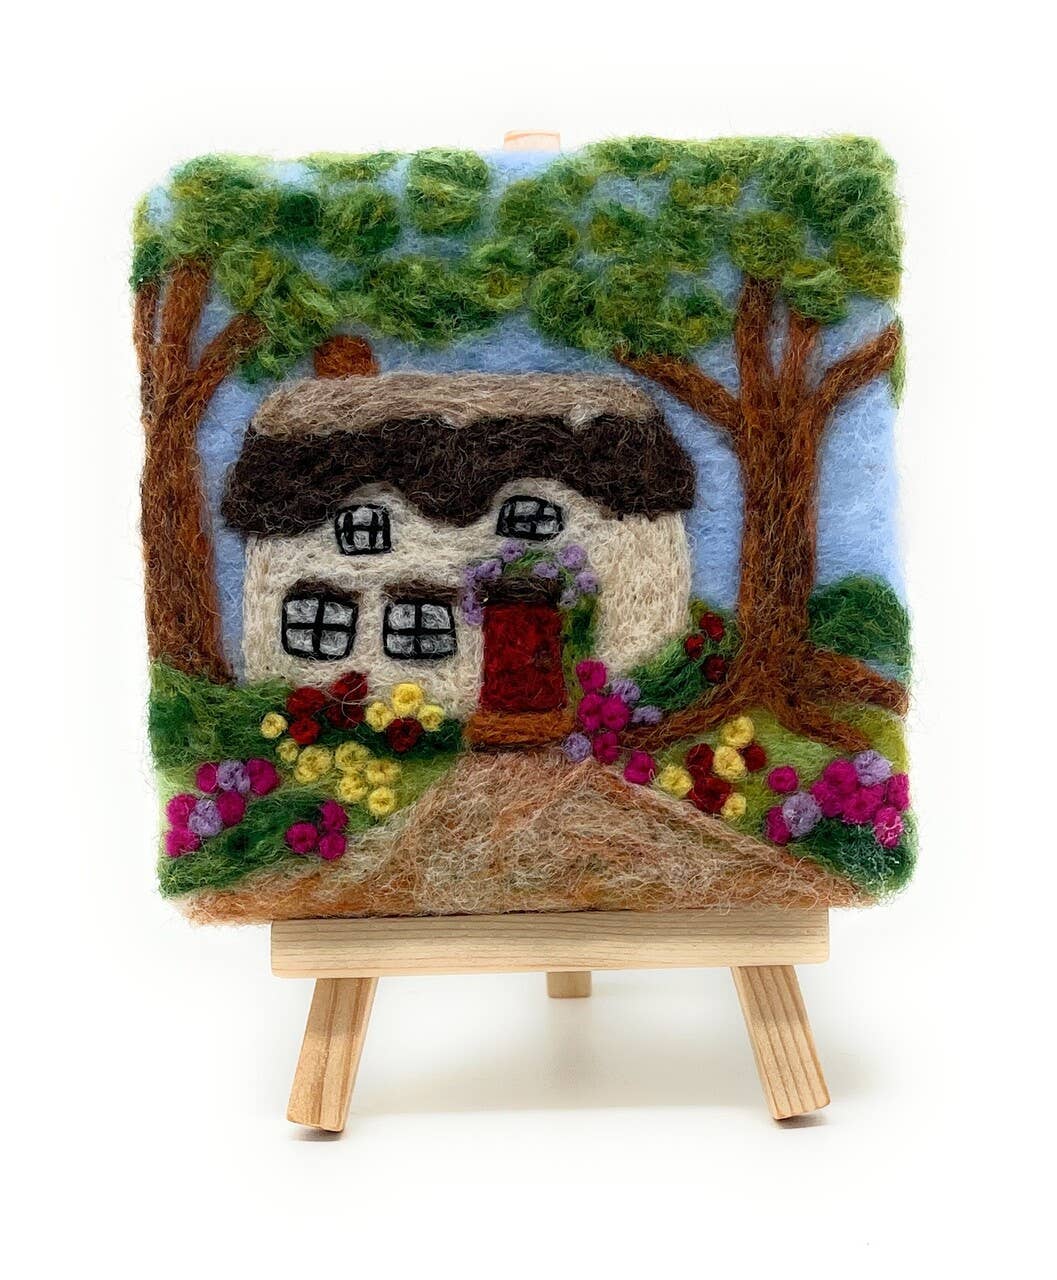 The Crafty Kit Company - Paint with Wool:Mini Masterpiece Thatched Cottage Craft Kit